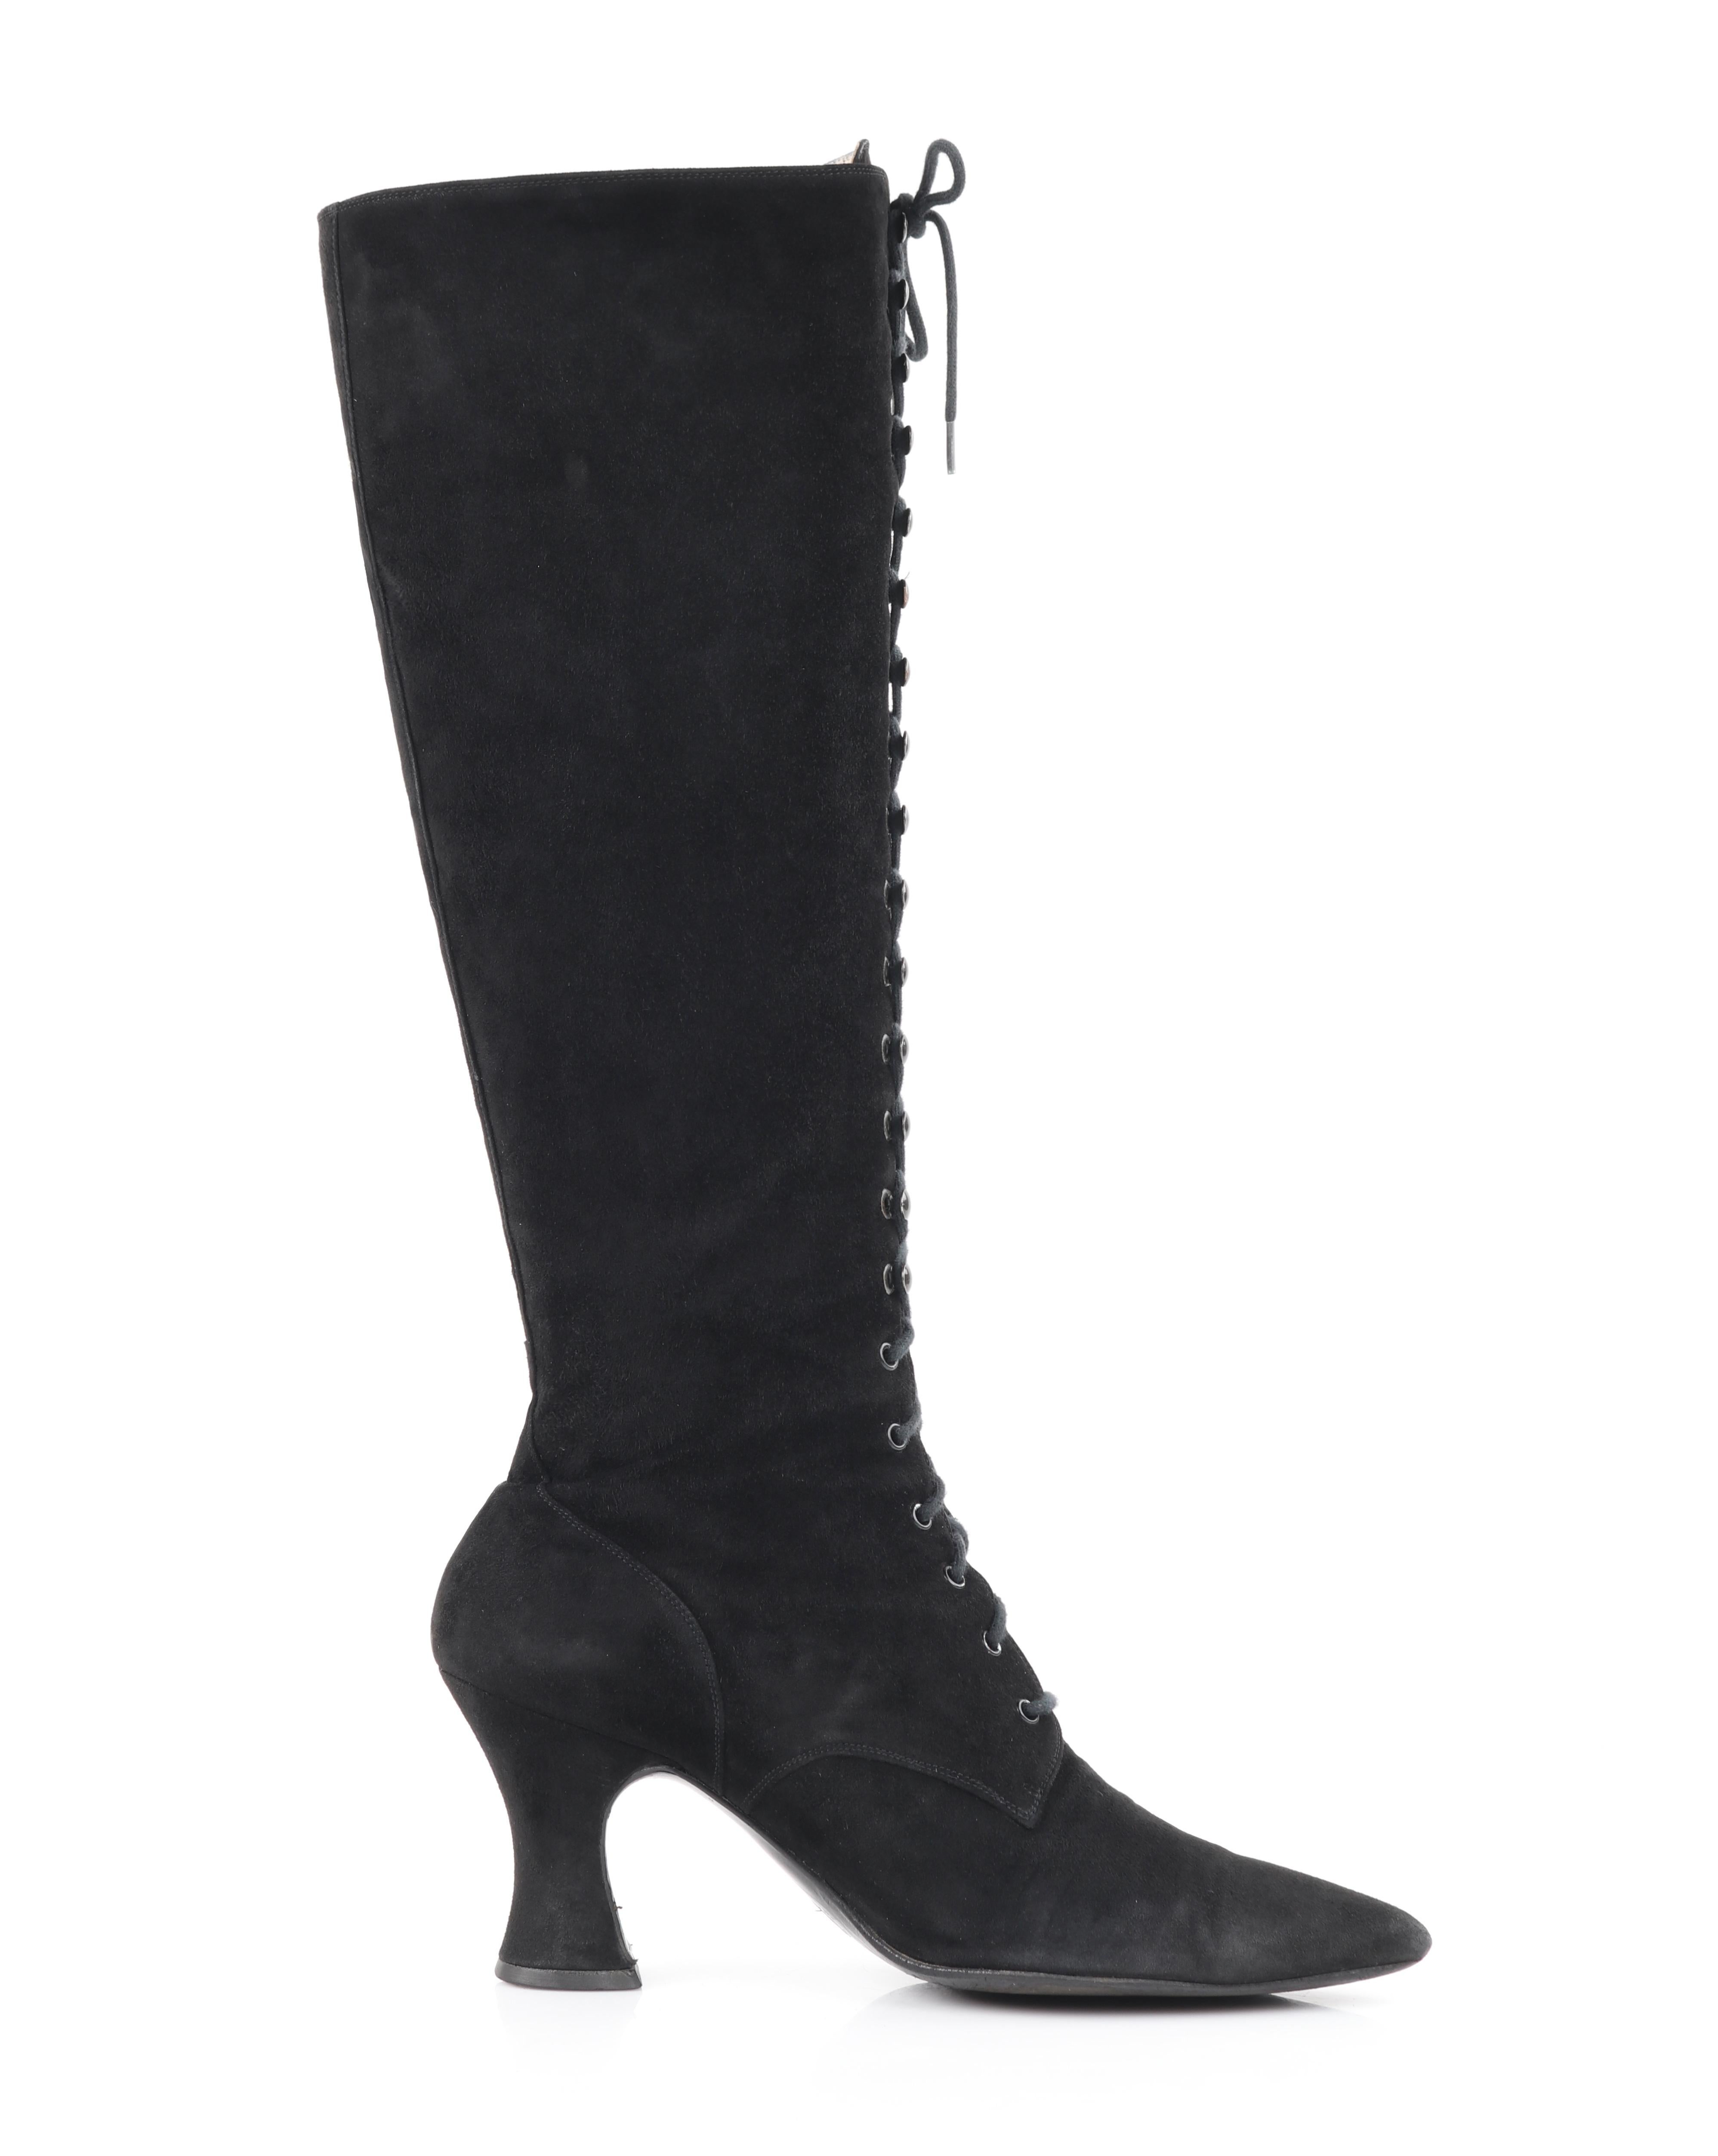 CHANEL Black Suede Leather Victorian Look Knee-High Lace Up Pointed Toe Boots In Fair Condition For Sale In Thiensville, WI